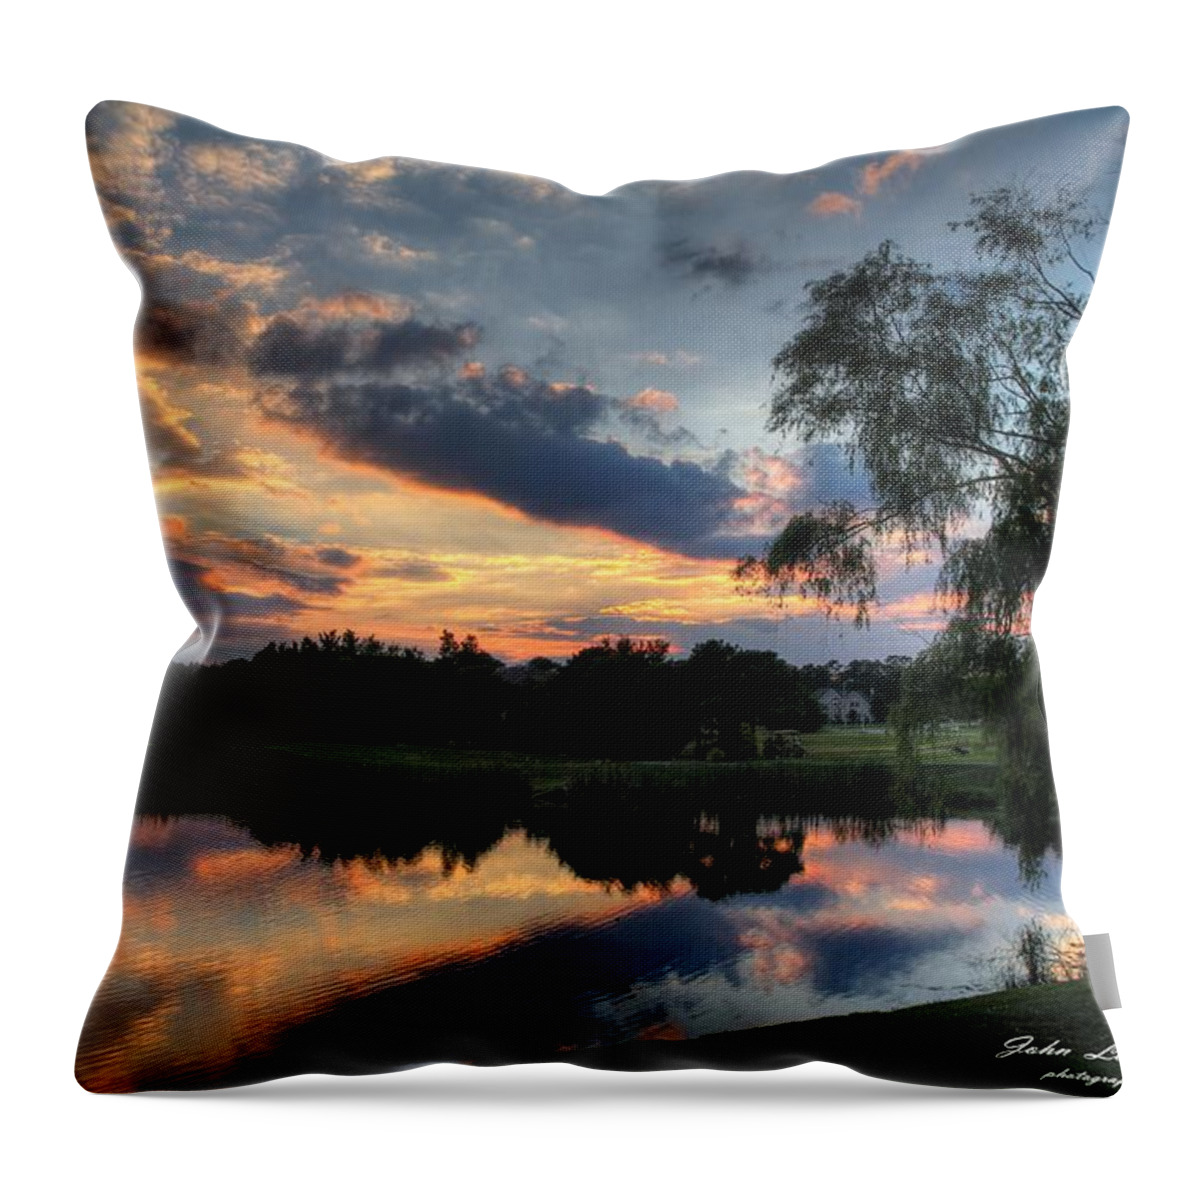 Sunset Throw Pillow featuring the photograph Harbor Reflections by John Loreaux